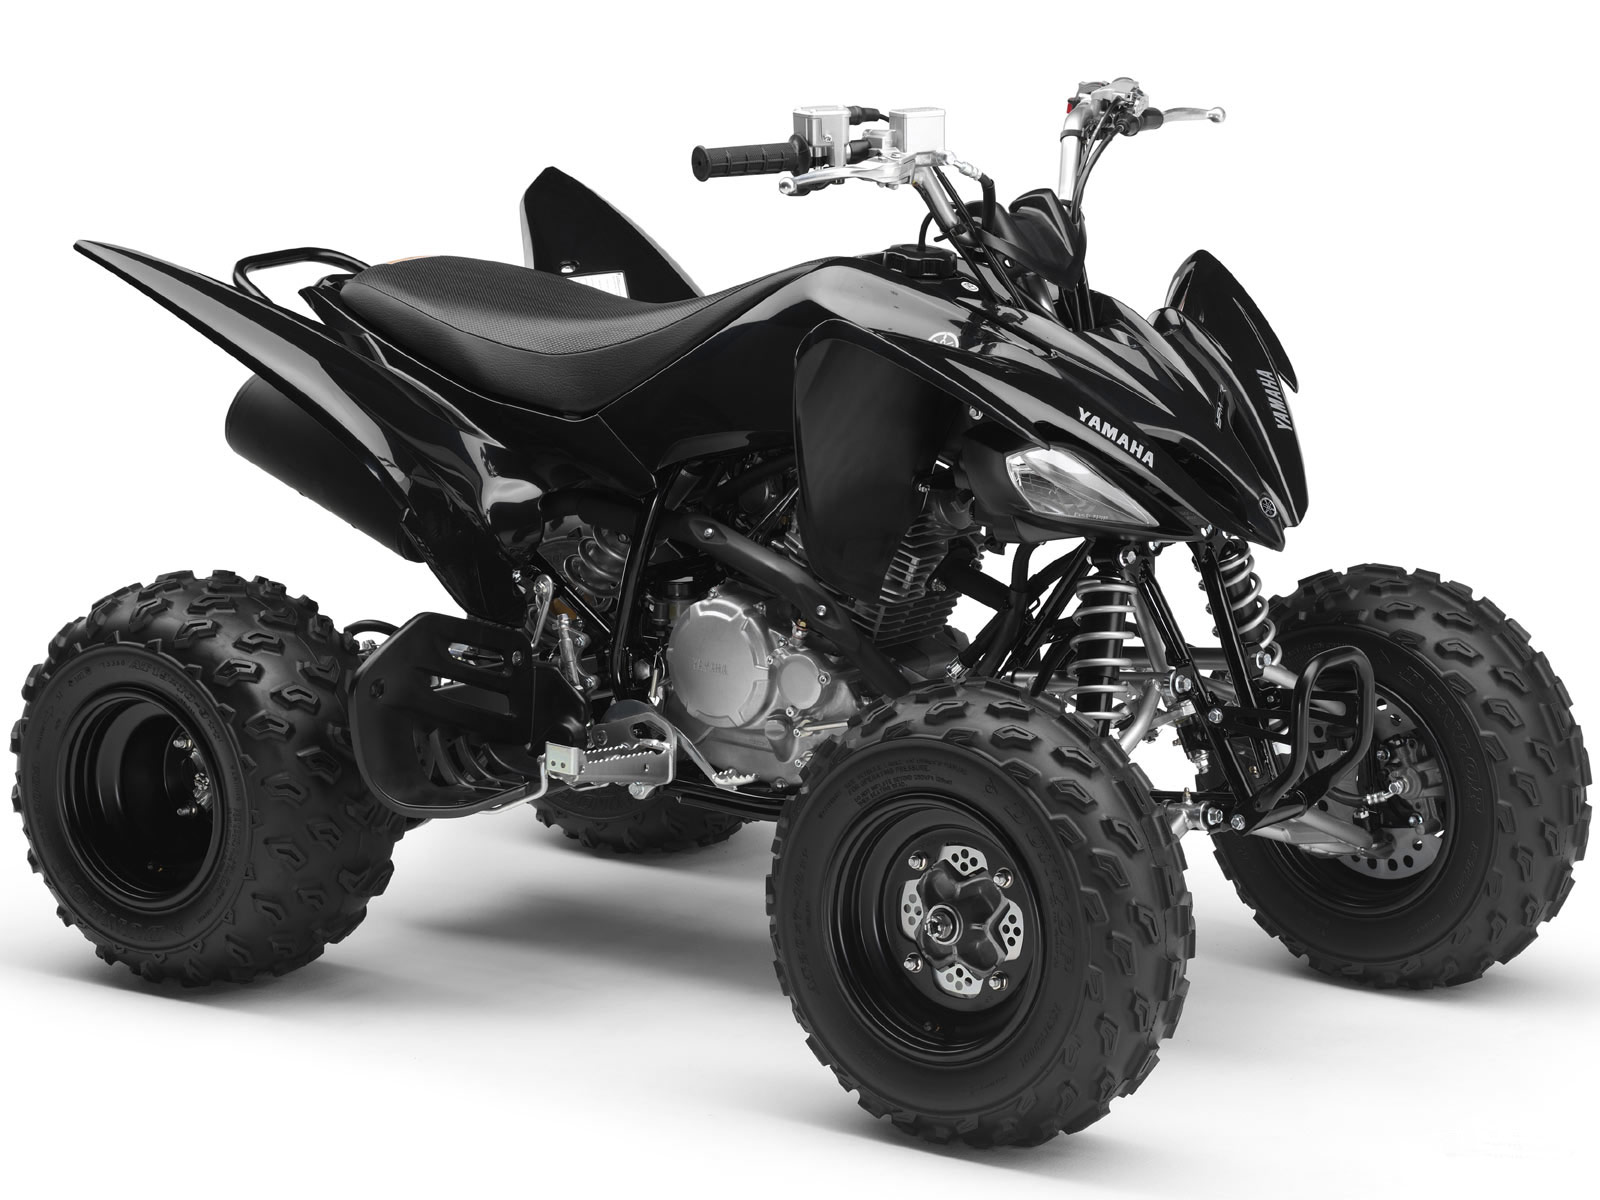 2008 YAMAHA YFM 250 Raptor ATV pictures, specifications